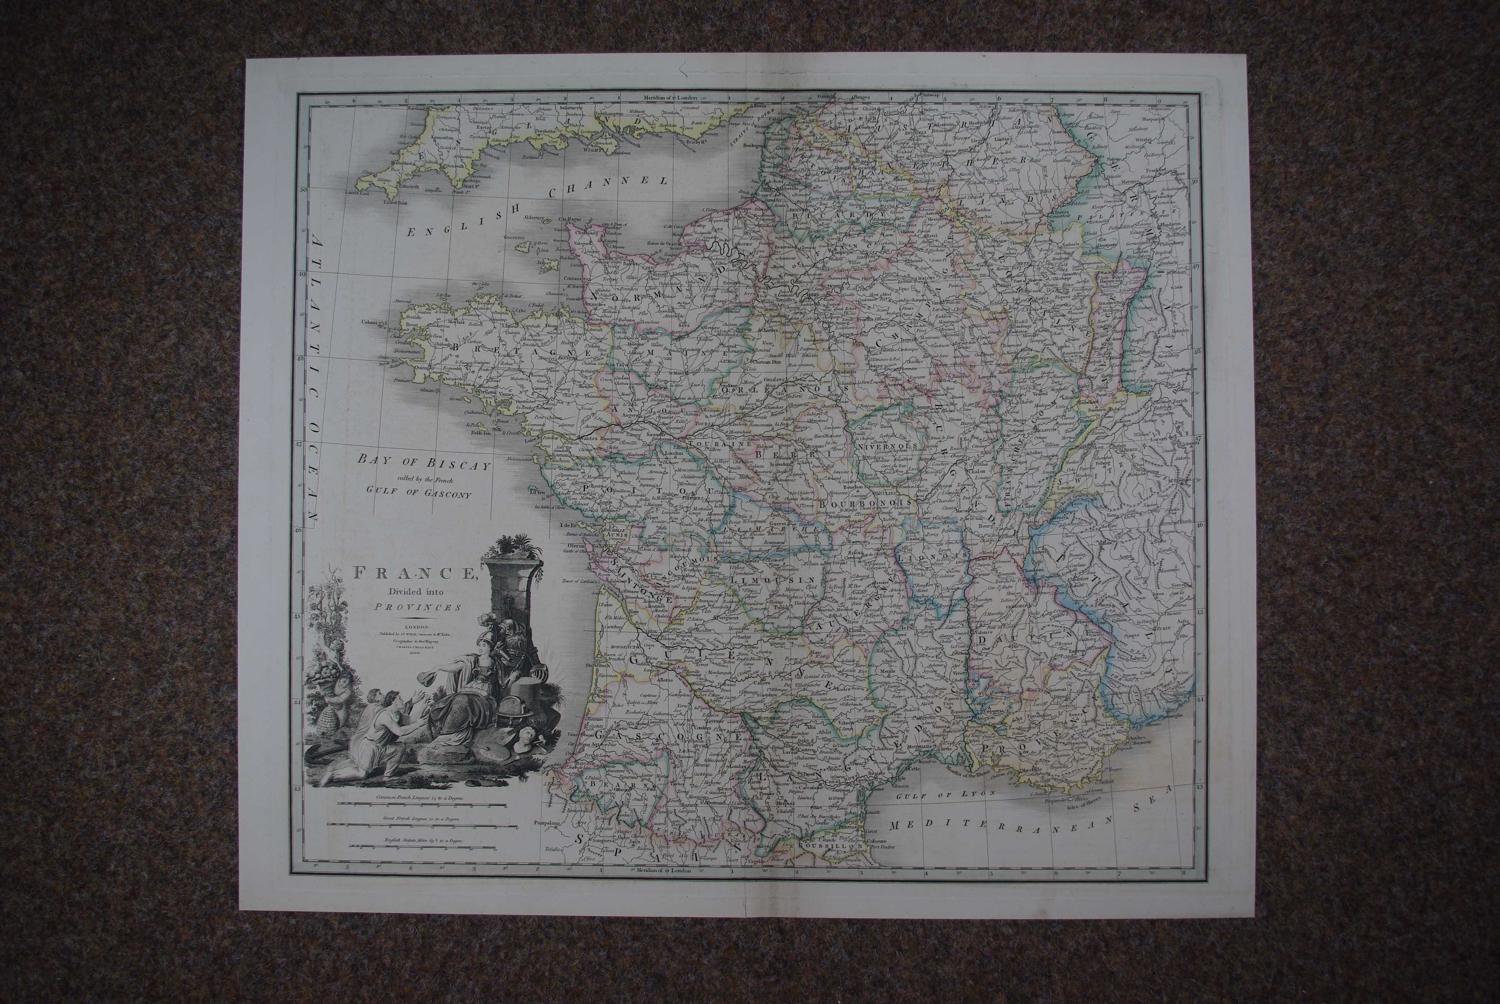 France, divided into Provinces by James Wyld